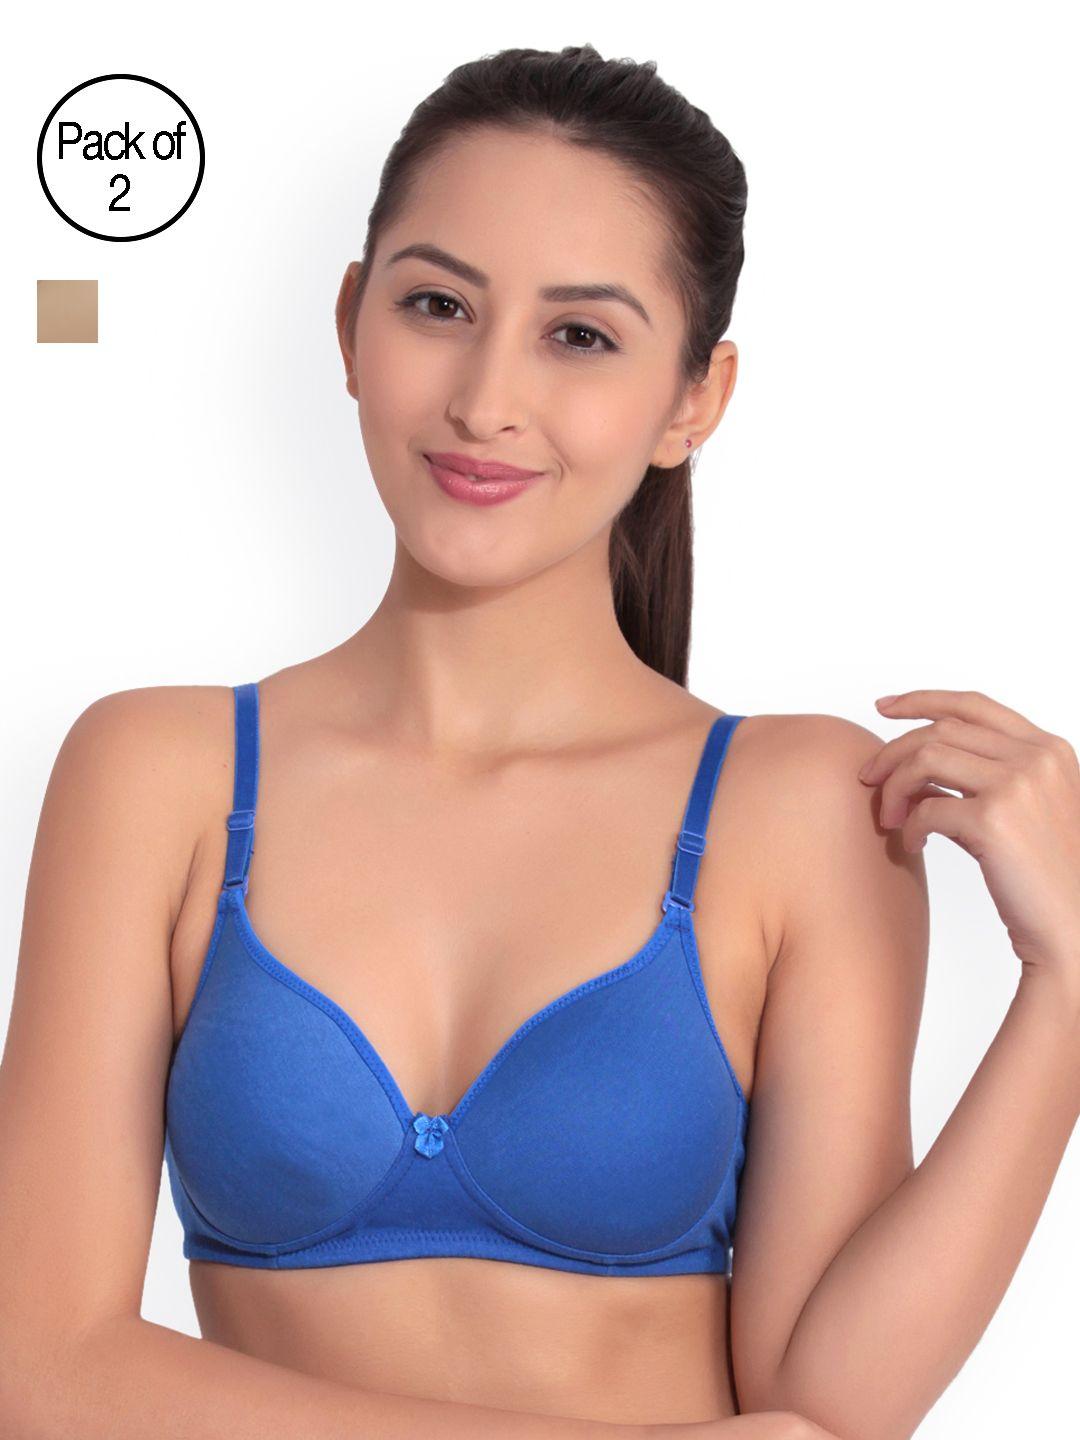 floret pack of 2 solid non-wired heavily padded push-up bra t3010_nude-blue_40b